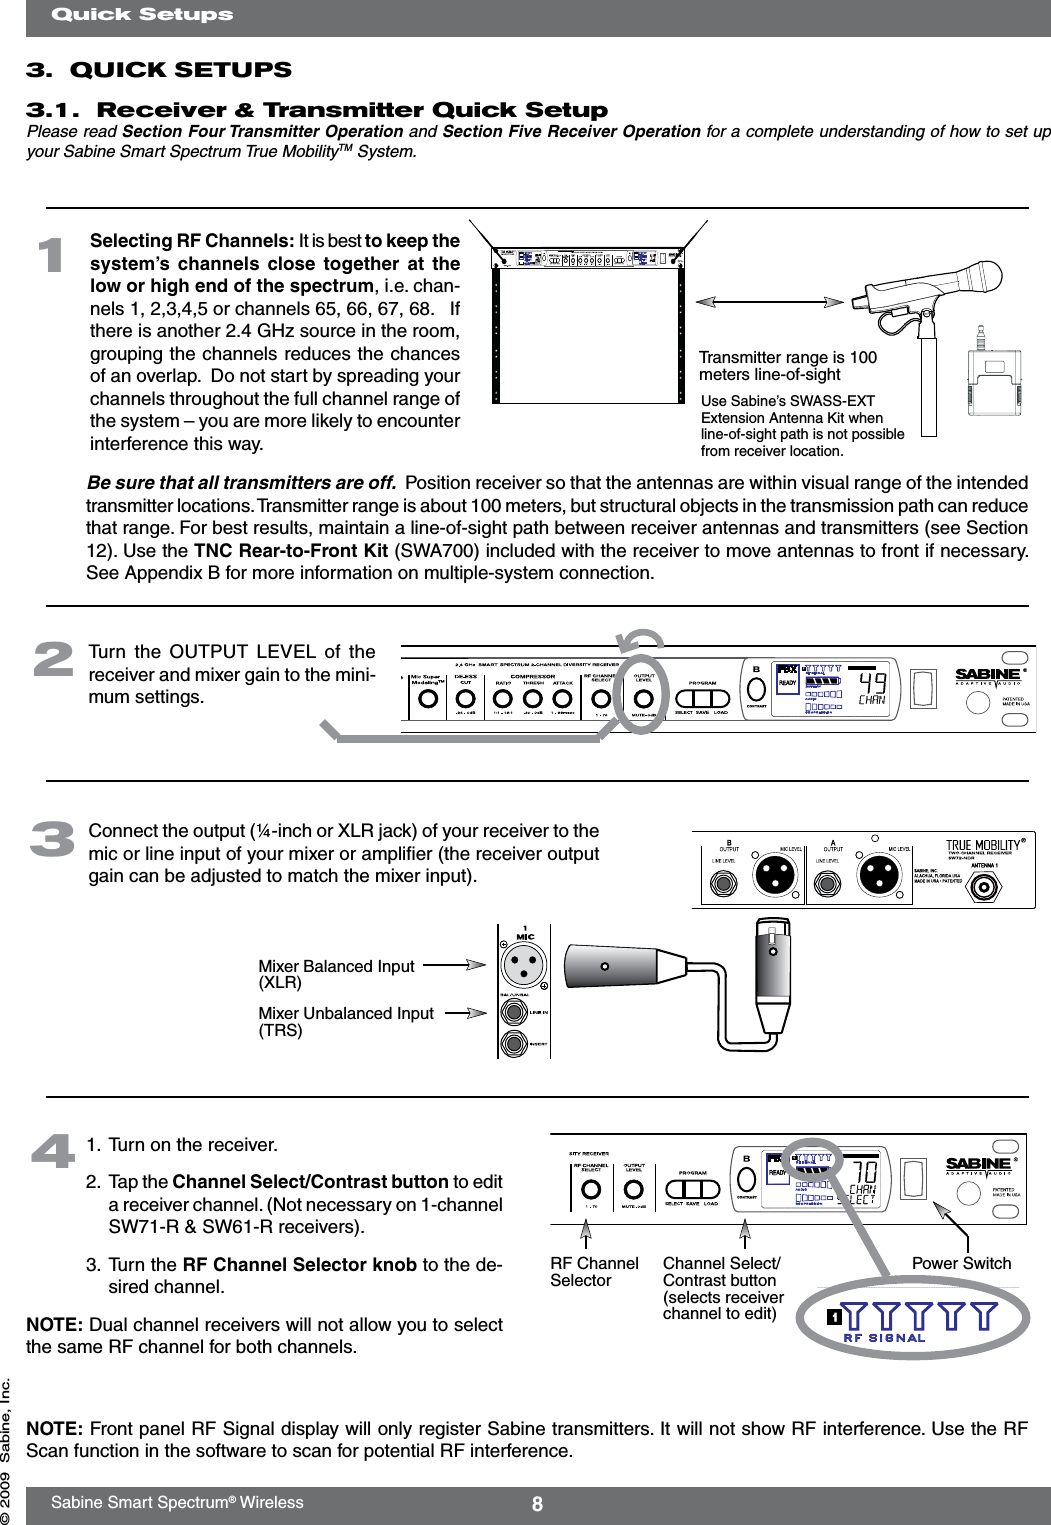 8Sabine Smart Spectrum® Wireless© 2009  Sabine, Inc.3.  QUICK SETUPS3.1.  Receiver &amp; Transmitter Quick Setup Please read Section Four Transmitter Operation and Section Five Receiver Operation for a complete understanding of how to set up your Sabine Smart Spectrum True MobilityTM System.Quick Setups  Turn  the  OUTPUT  LEVEL of the  receiver and mixer gain to the mini-mum settings.2  Connect the output (¼-inch or XLR jack) of your receiver to the mic or line input of your mixer or ampliﬁer (the receiver output gain can be adjusted to match the mixer input).3Mixer Balanced Input (XLR)Mixer Unbalanced Input (TRS)1.  Turn on the receiver.2.  Tap the Channel Select/Contrast button to edit a receiver channel. (Not necessary on 1-channel SW71-R &amp; SW61-R receivers).3.  Turn the RF Channel Selector knob to the de-sired channel.NOTE: Dual channel receivers will not allow you to select the same RF channel for both channels.4Power SwitchRF Channel Selector Channel Select/Contrast button (selects receiver channel to edit)Transmitter range is 100 meters line-of-sight  Be sure that all transmitters are off.  Position receiver so that the antennas are within visual range of the intended transmitter locations. Transmitter range is about 100 meters, but structural objects in the transmission path can reduce that range. For best results, maintain a line-of-sight path between receiver antennas and transmitters (see Section 12). Use the TNC Rear-to-Front Kit (SWA700) included with the receiver to move antennas to front if necessary. See Appendix B for more information on multiple-system connection.Use Sabine’s SWASS-EXT Extension Antenna Kit when line-of-sight path is not possible from receiver location.1NOTE: Front panel RF Signal display will only register Sabine transmitters. It will not show RF interference. Use the RF Scan function in the software to scan for potential RF interference.Selecting RF Channels: It is best to keep the system’s  channels  close together  at  the low or high end of the spectrum, i.e. chan-nels 1, 2,3,4,5 or channels 65, 66, 67, 68.   If there is another 2.4 GHz source in the room, grouping the channels reduces the chances of an overlap.  Do not start by spreading your channels throughout the full channel range of the system – you are more likely to encounter interference this way. 